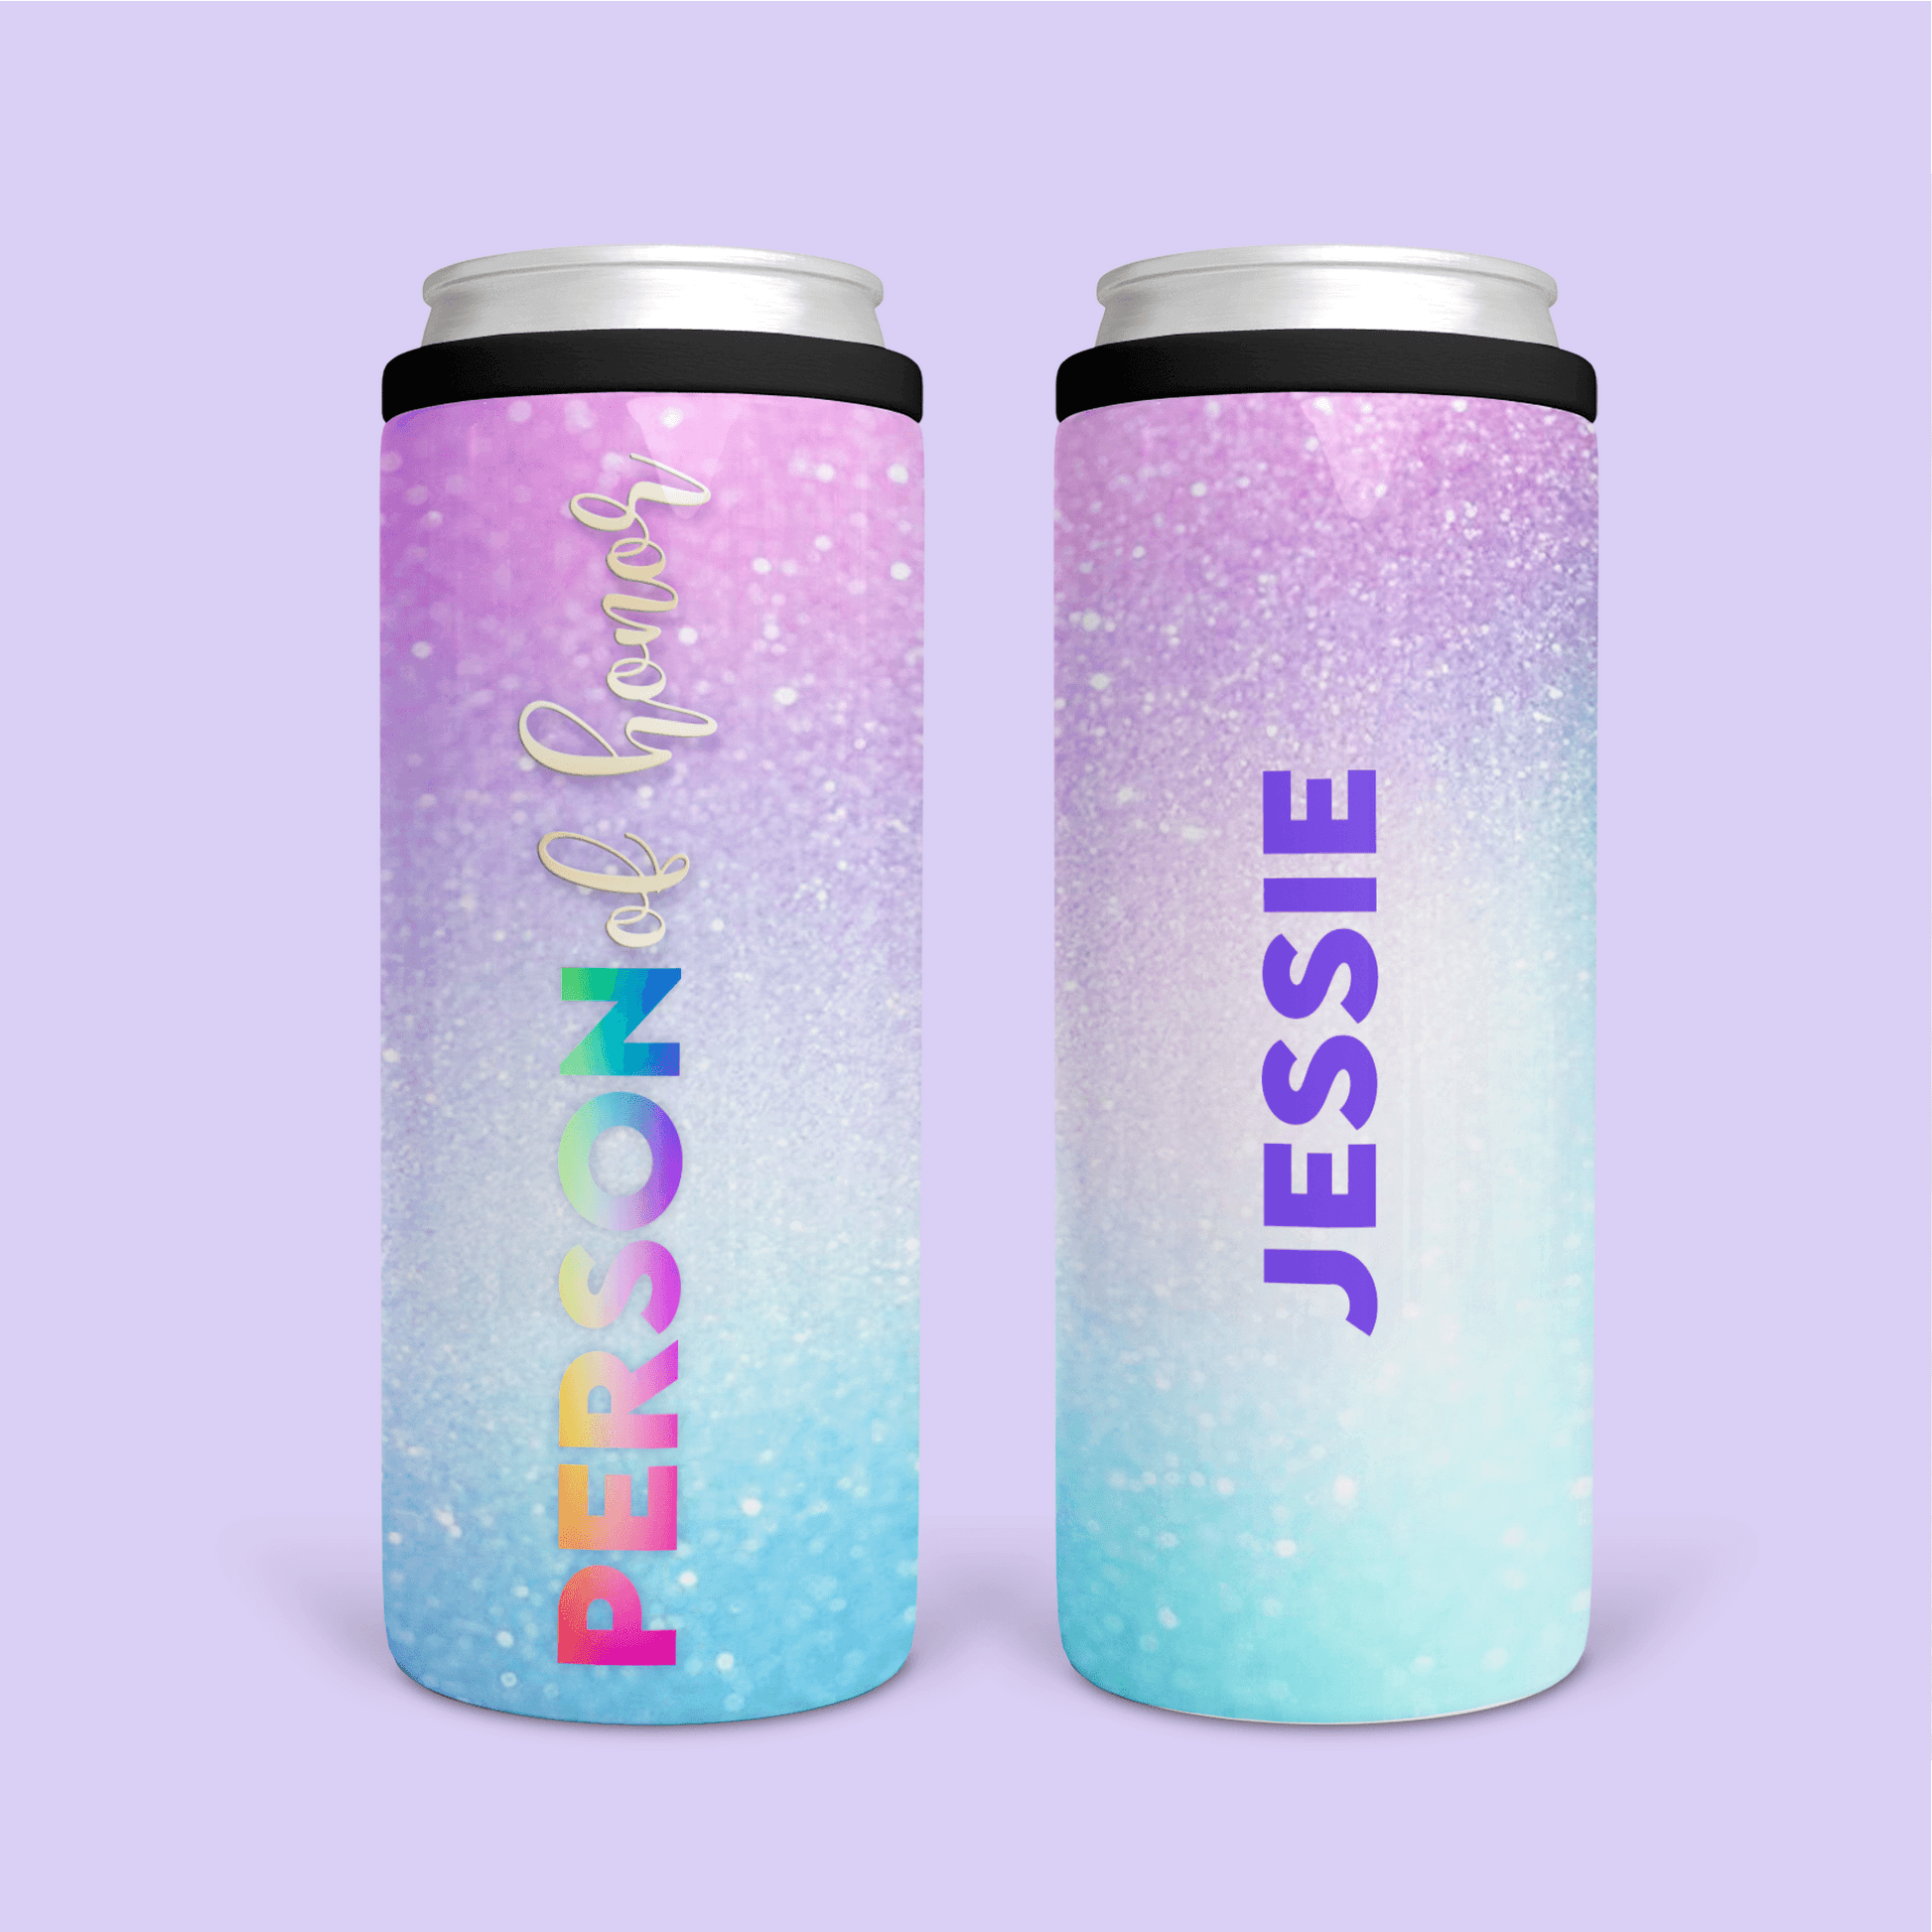 Person of Honor Slim Can Cooler - Two Crafty Gays